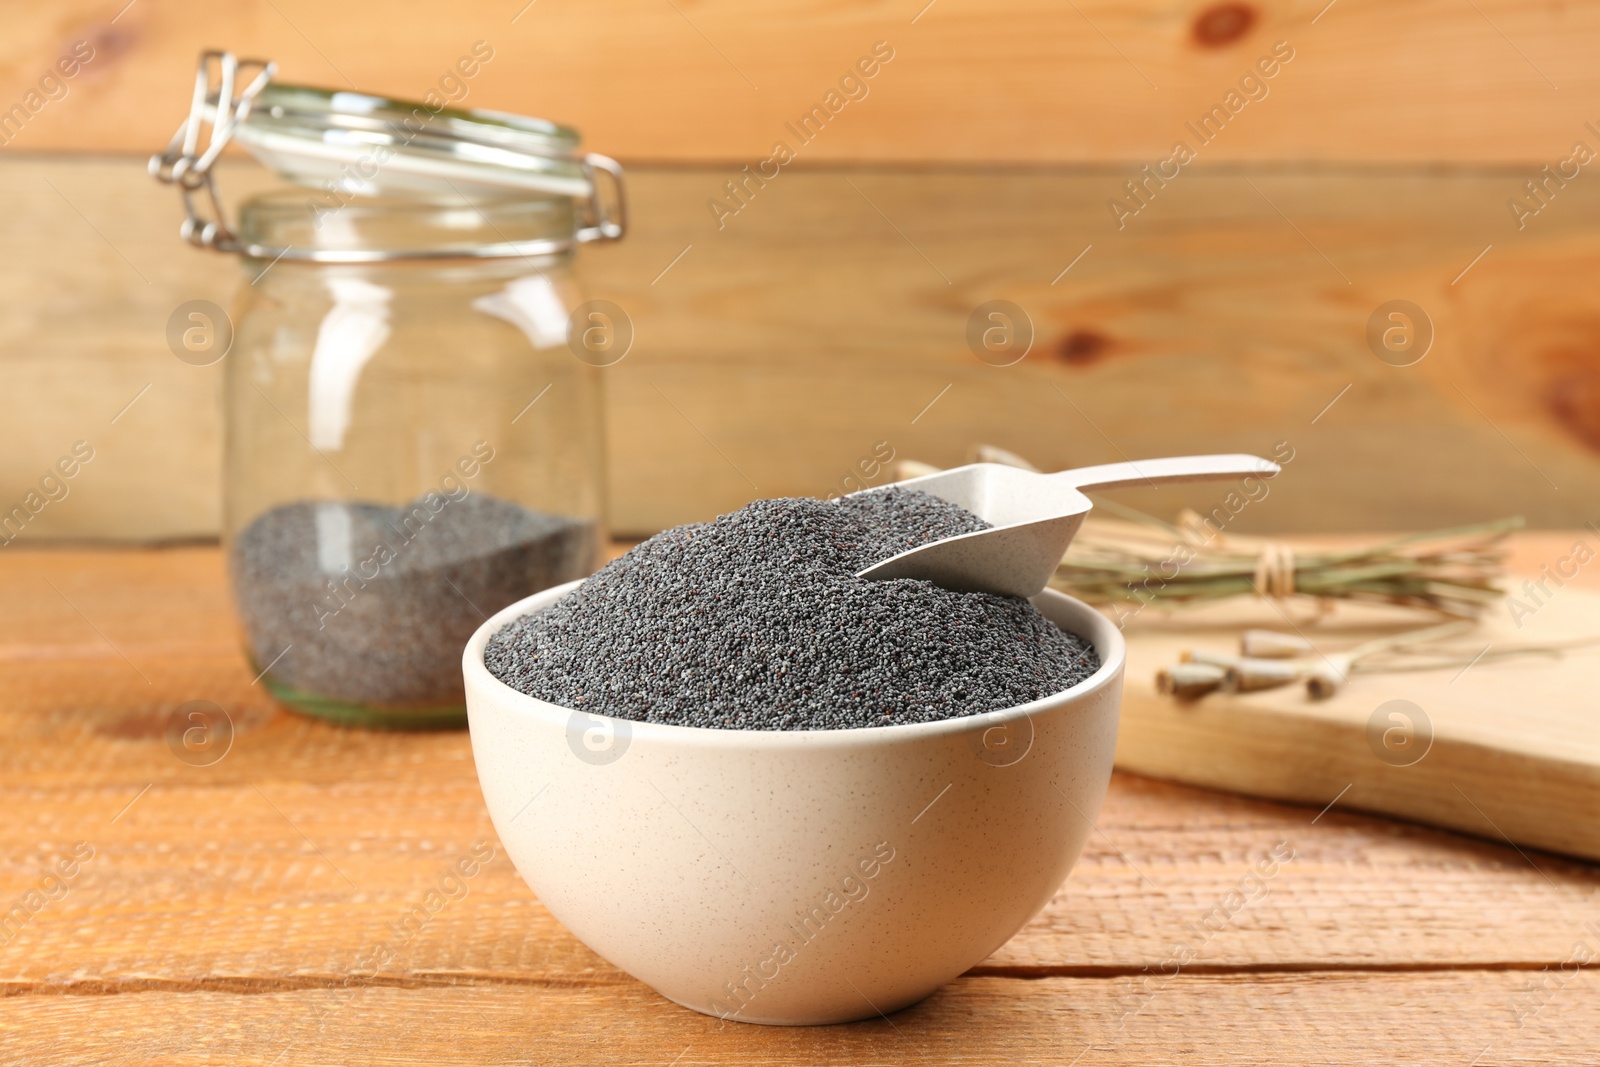 Photo of Poppy seeds and scoop in bowl on wooden table